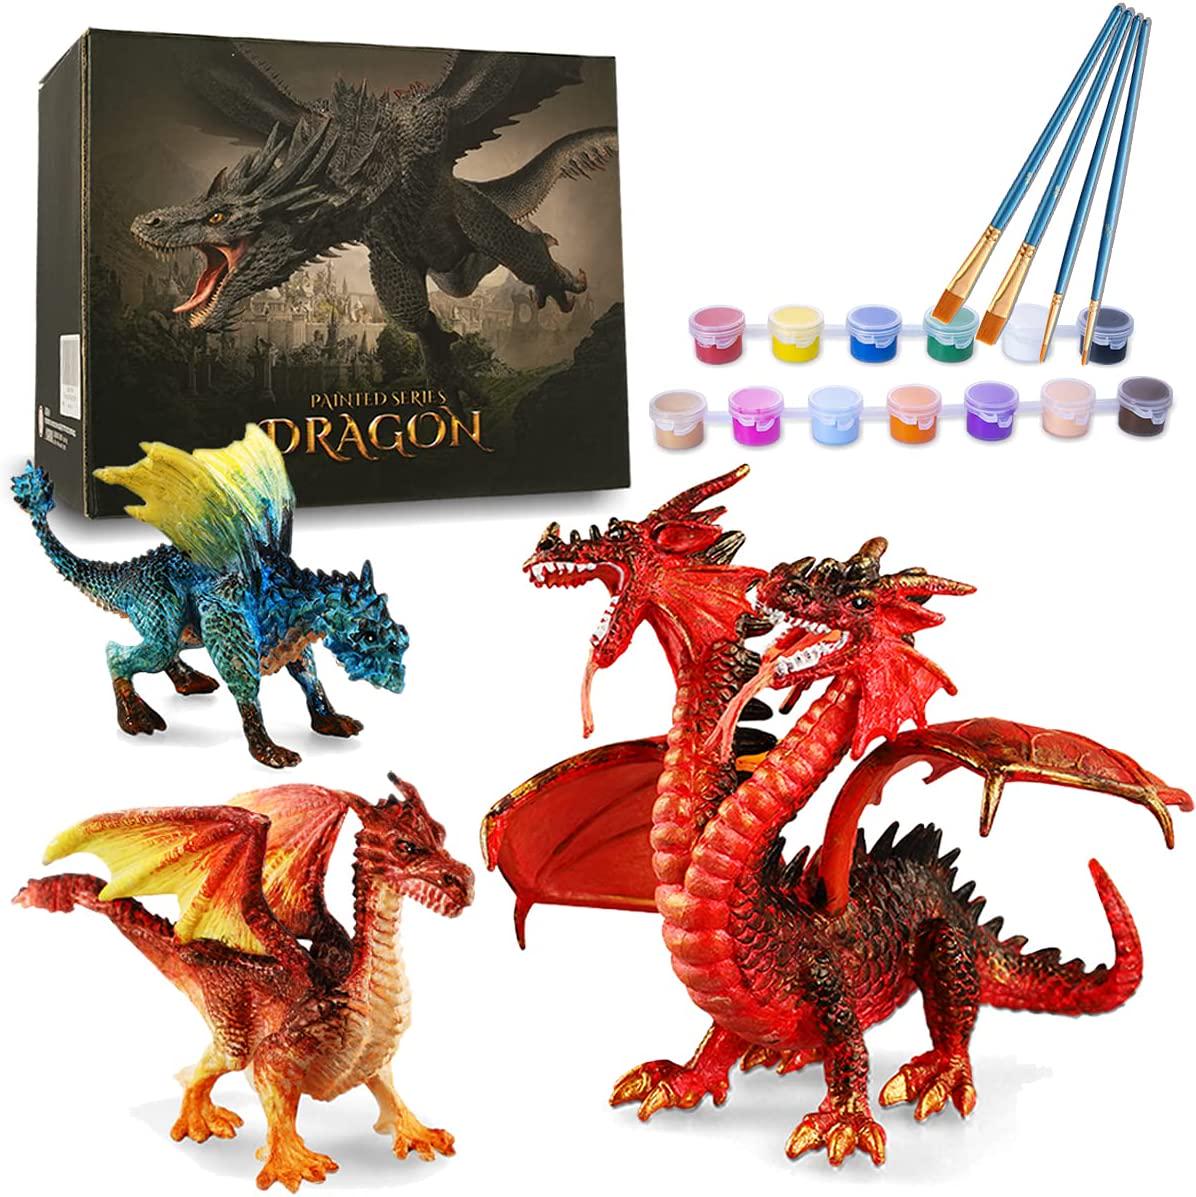 ARTLYMERS, Kids Crafts, DIY 3D Dragon Painting Toys with 13 Color Educational Toy Painting Set Paint Your Own Gift Art and Craft Kit for Kids Boys Girls 3 4 5 6 7 8 9 Year Old